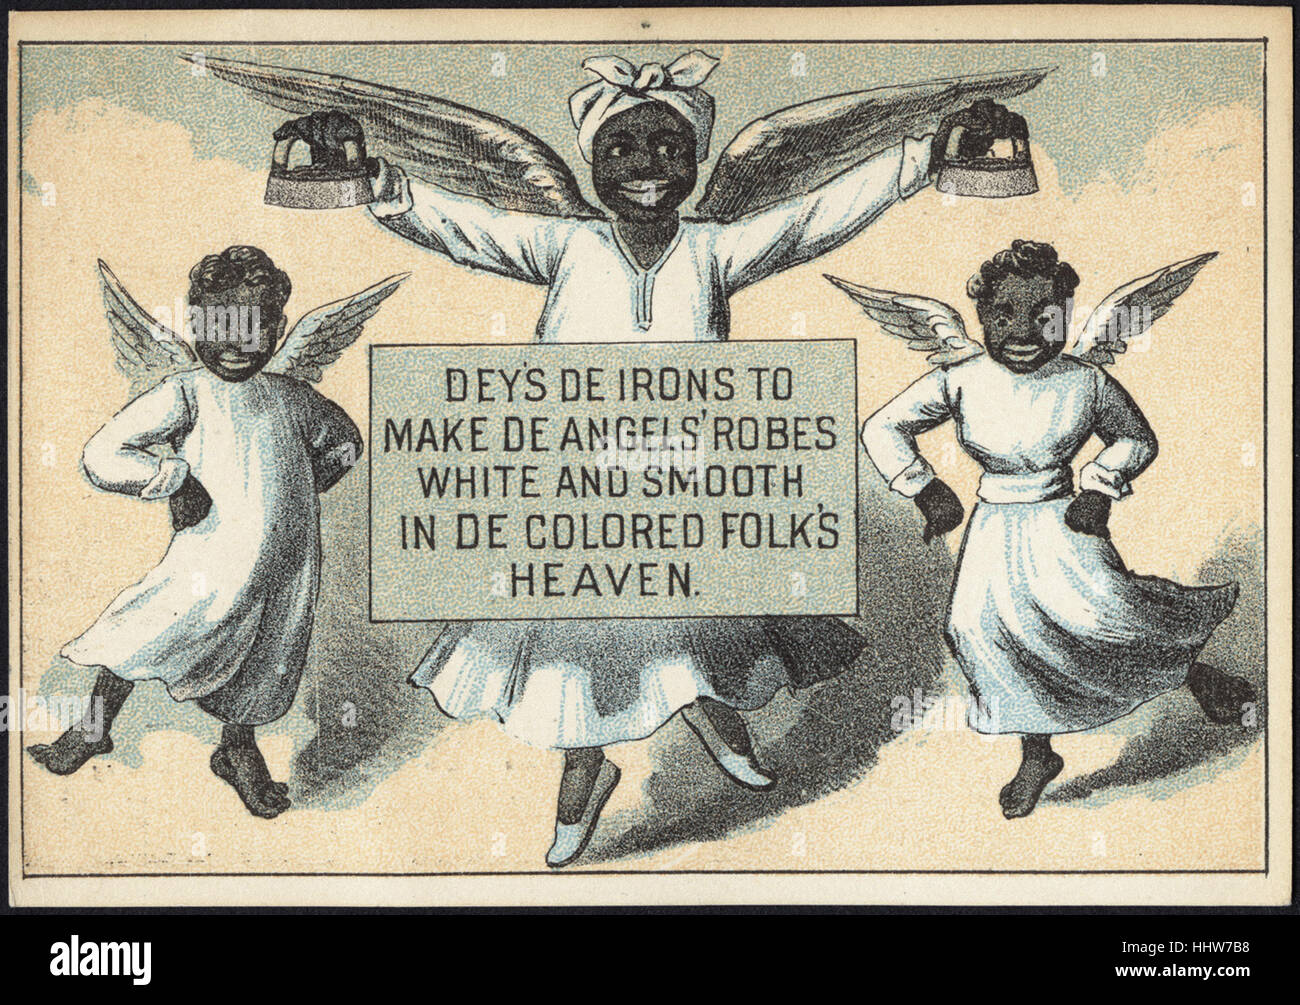 Deys de irons to make de angels' robes white and smooth in de colored folk's heaven. [front]  - Laundry Trade Cards Stock Photo